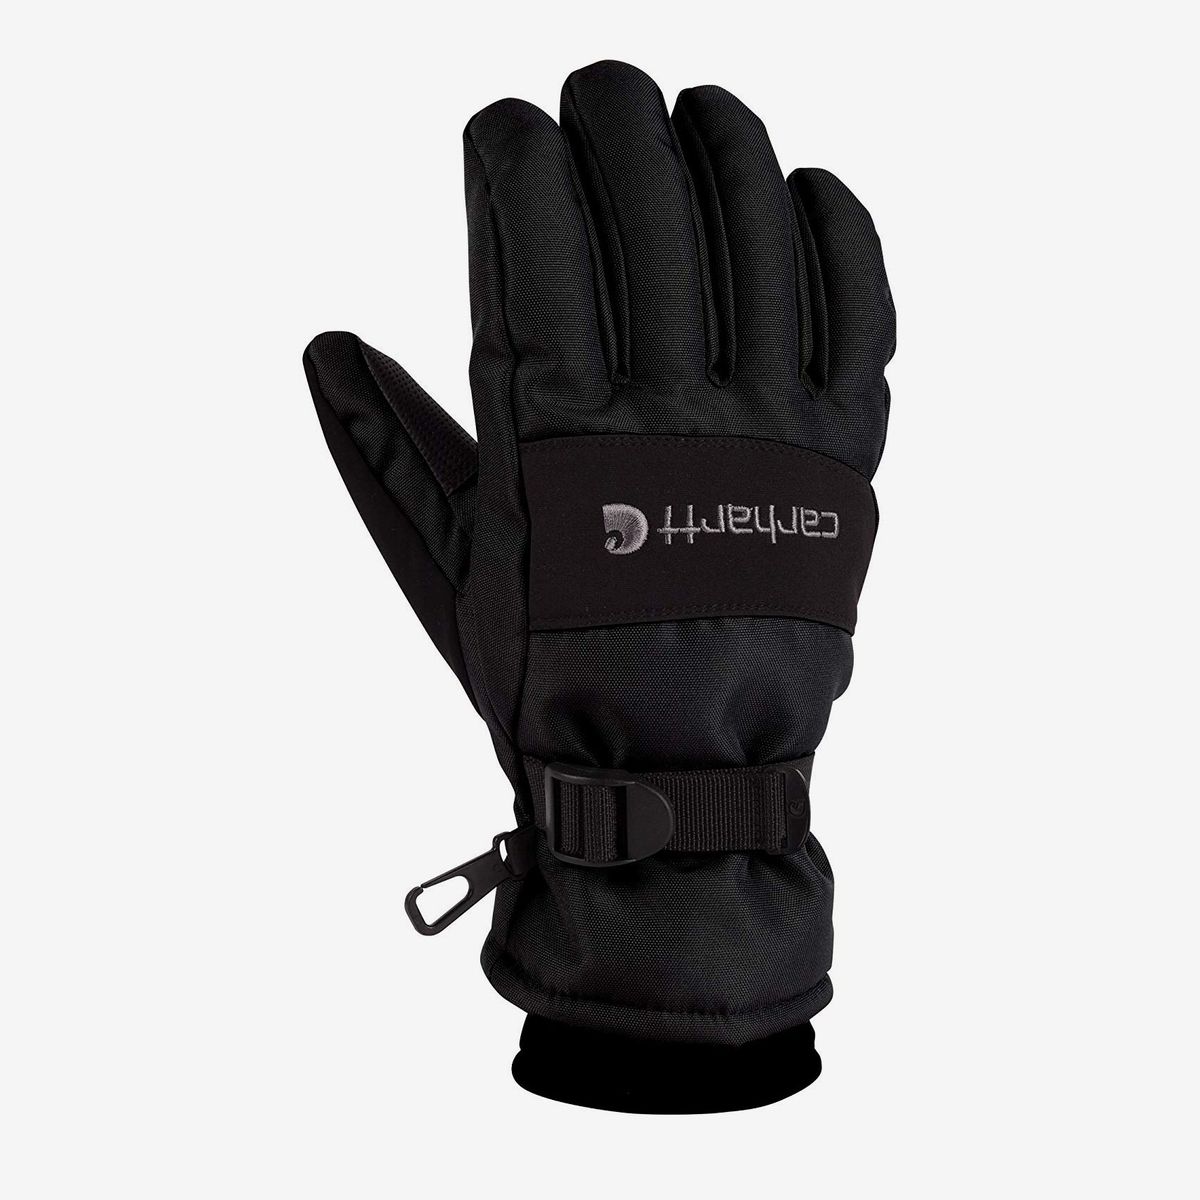 Mens Winter Gloves Cold Weather Thermal Warm Fleece Windproof Gloves for Men 